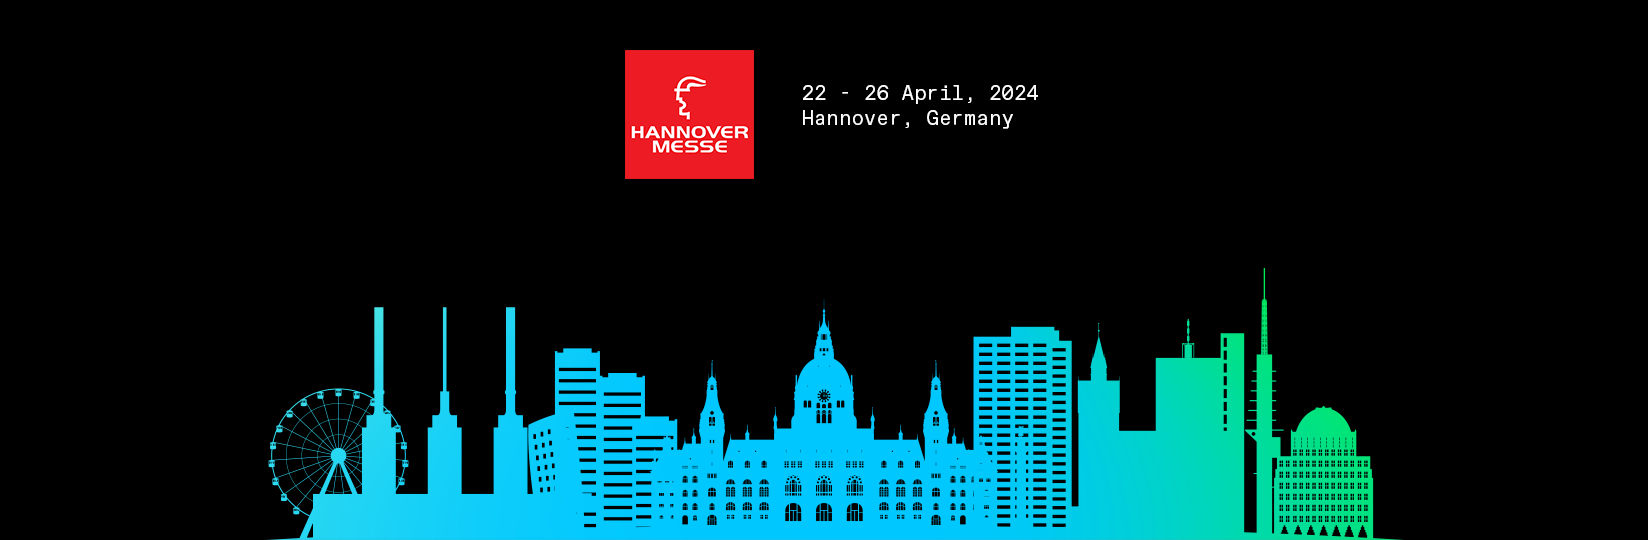 Sustainable Energy Industry Showcase: Hannover Messe 2024